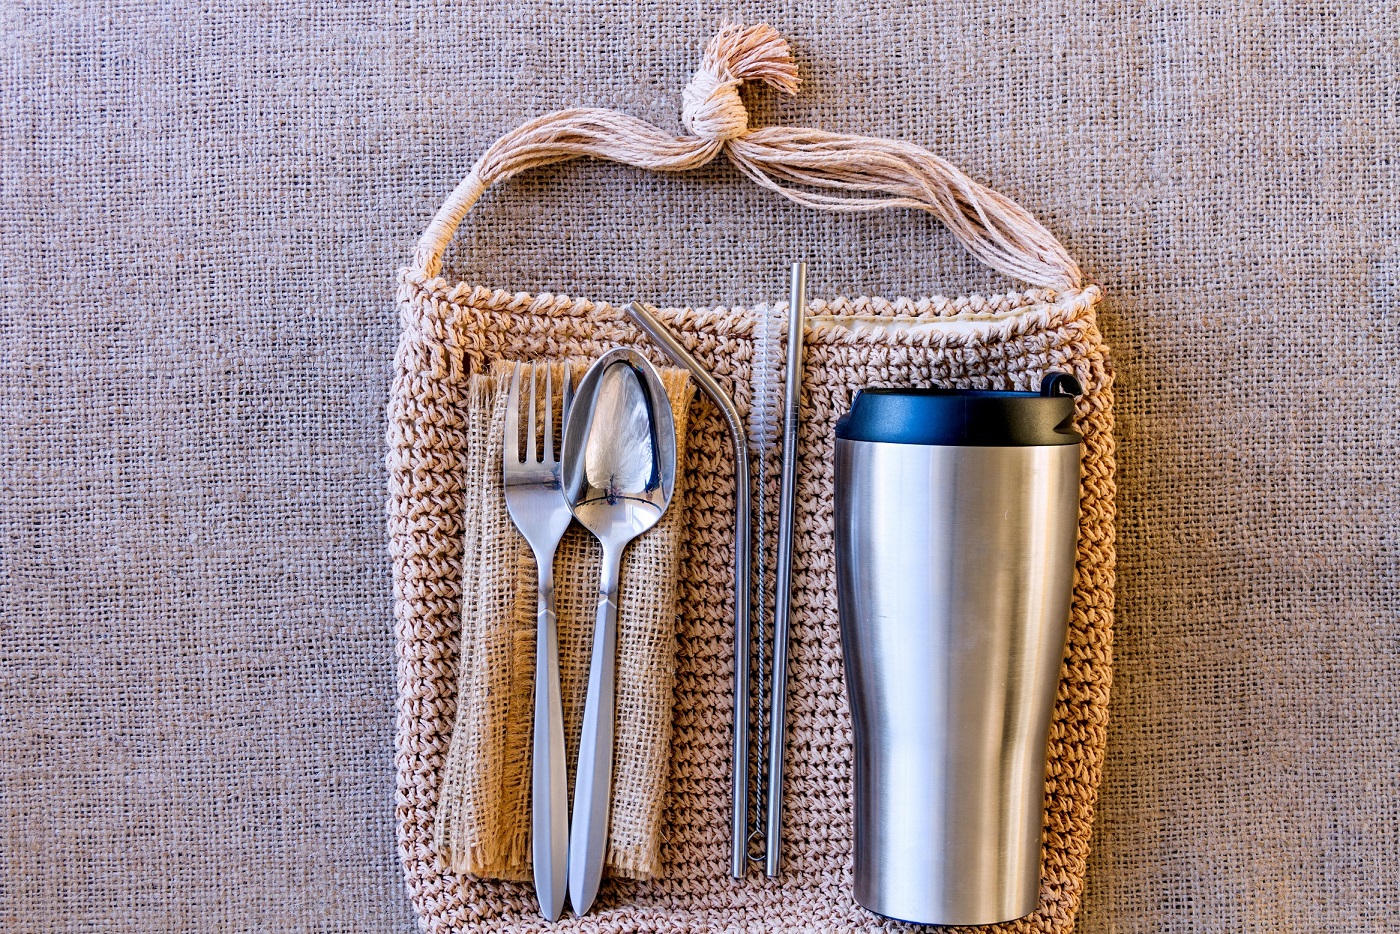 Bag with picnic set on background of burlap. Alternative to disposable tableware. Thermo cup, metal straw with brush, spoon, fork and reusable napkin. Zero waste and plastic free concept.